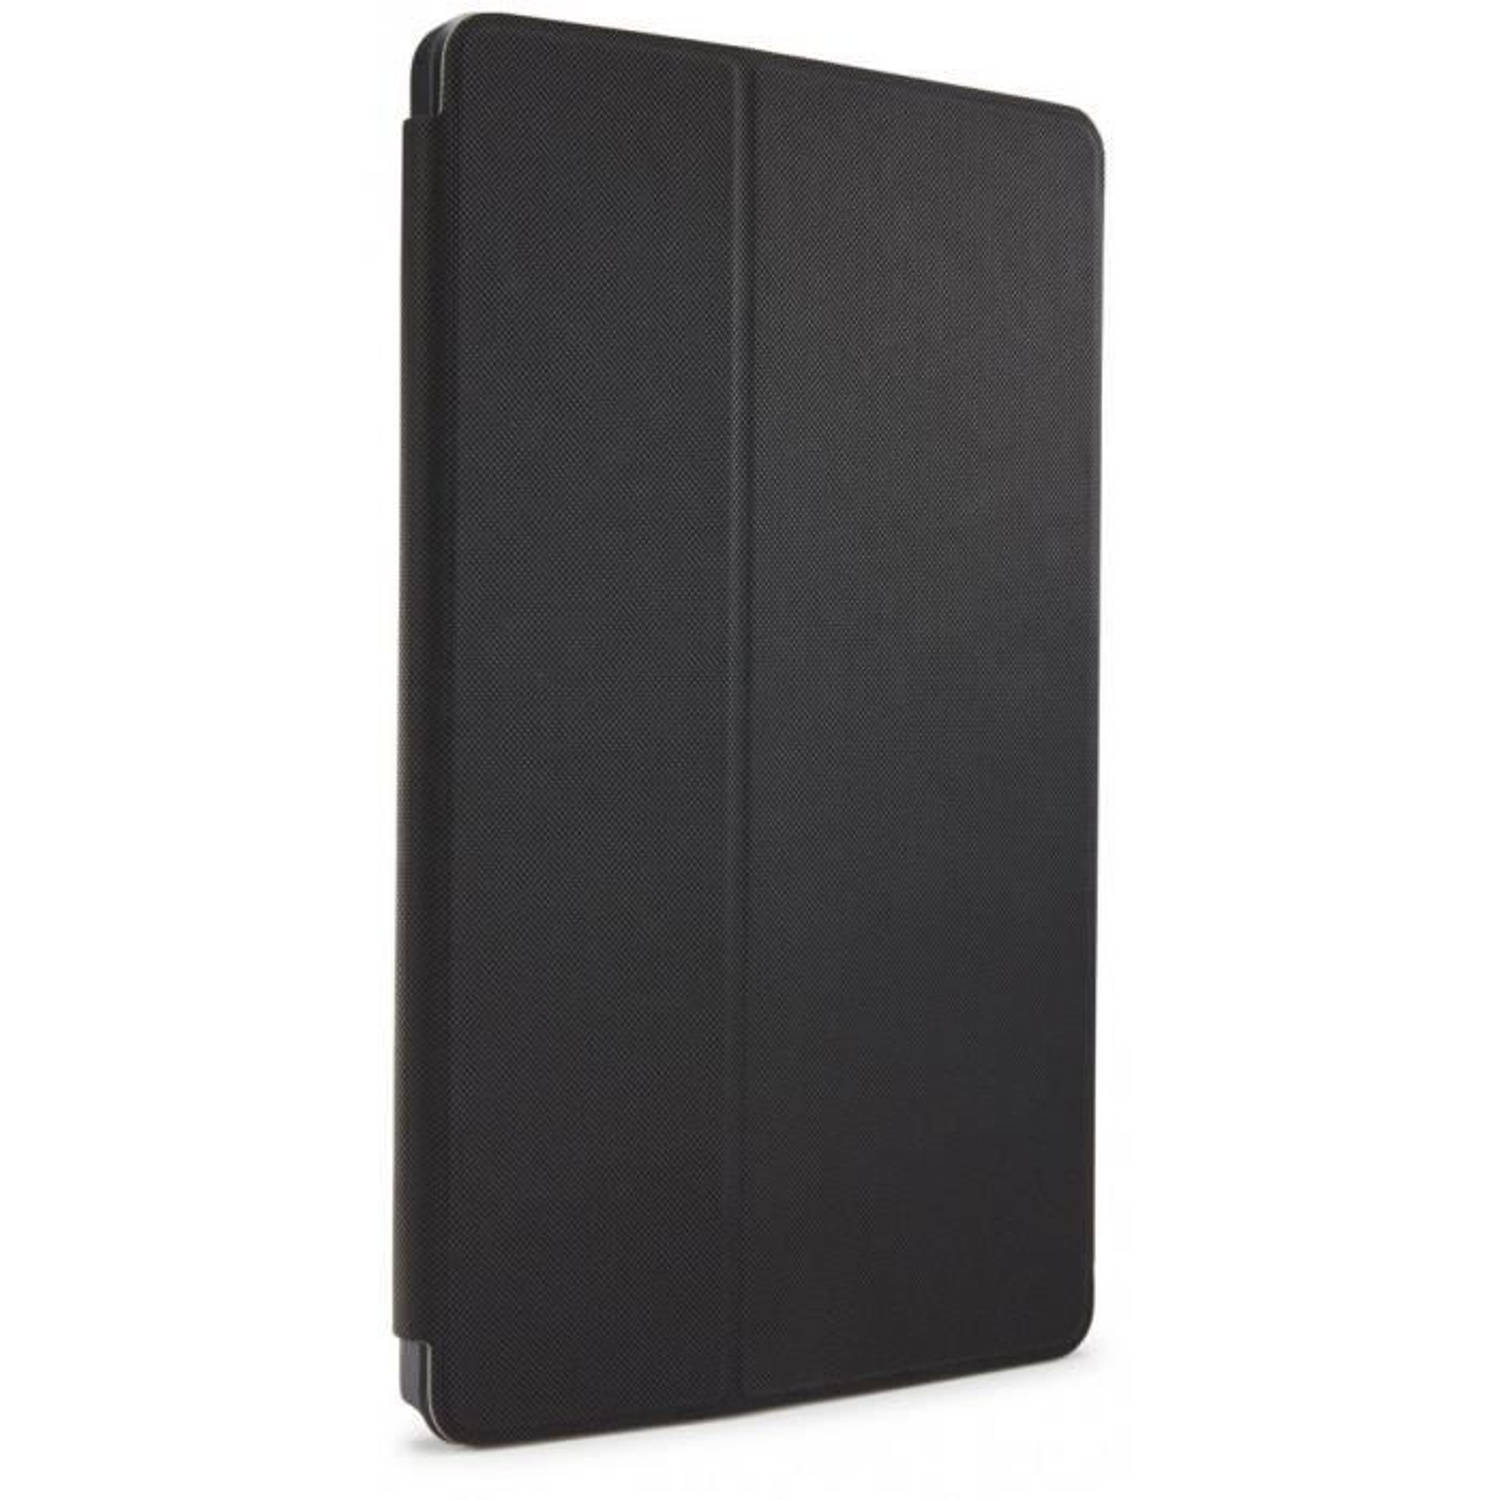 Tablet hoes - CASE LOGIC - Snapview - Zwart - Tab A7 10.4